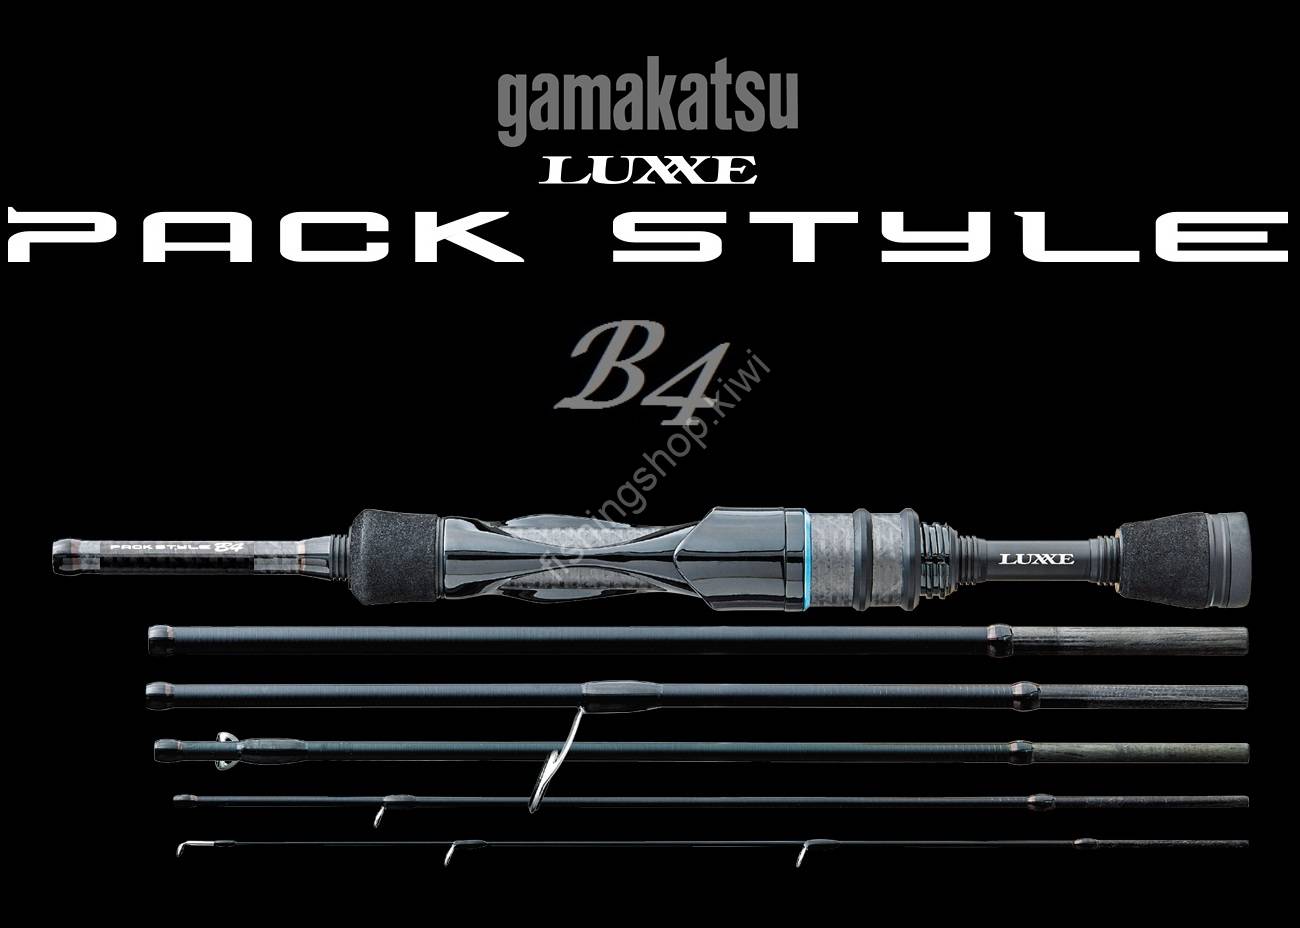 GAMAKATSU Luxxe 24714 Pack Style B4 B610M Rods buy at